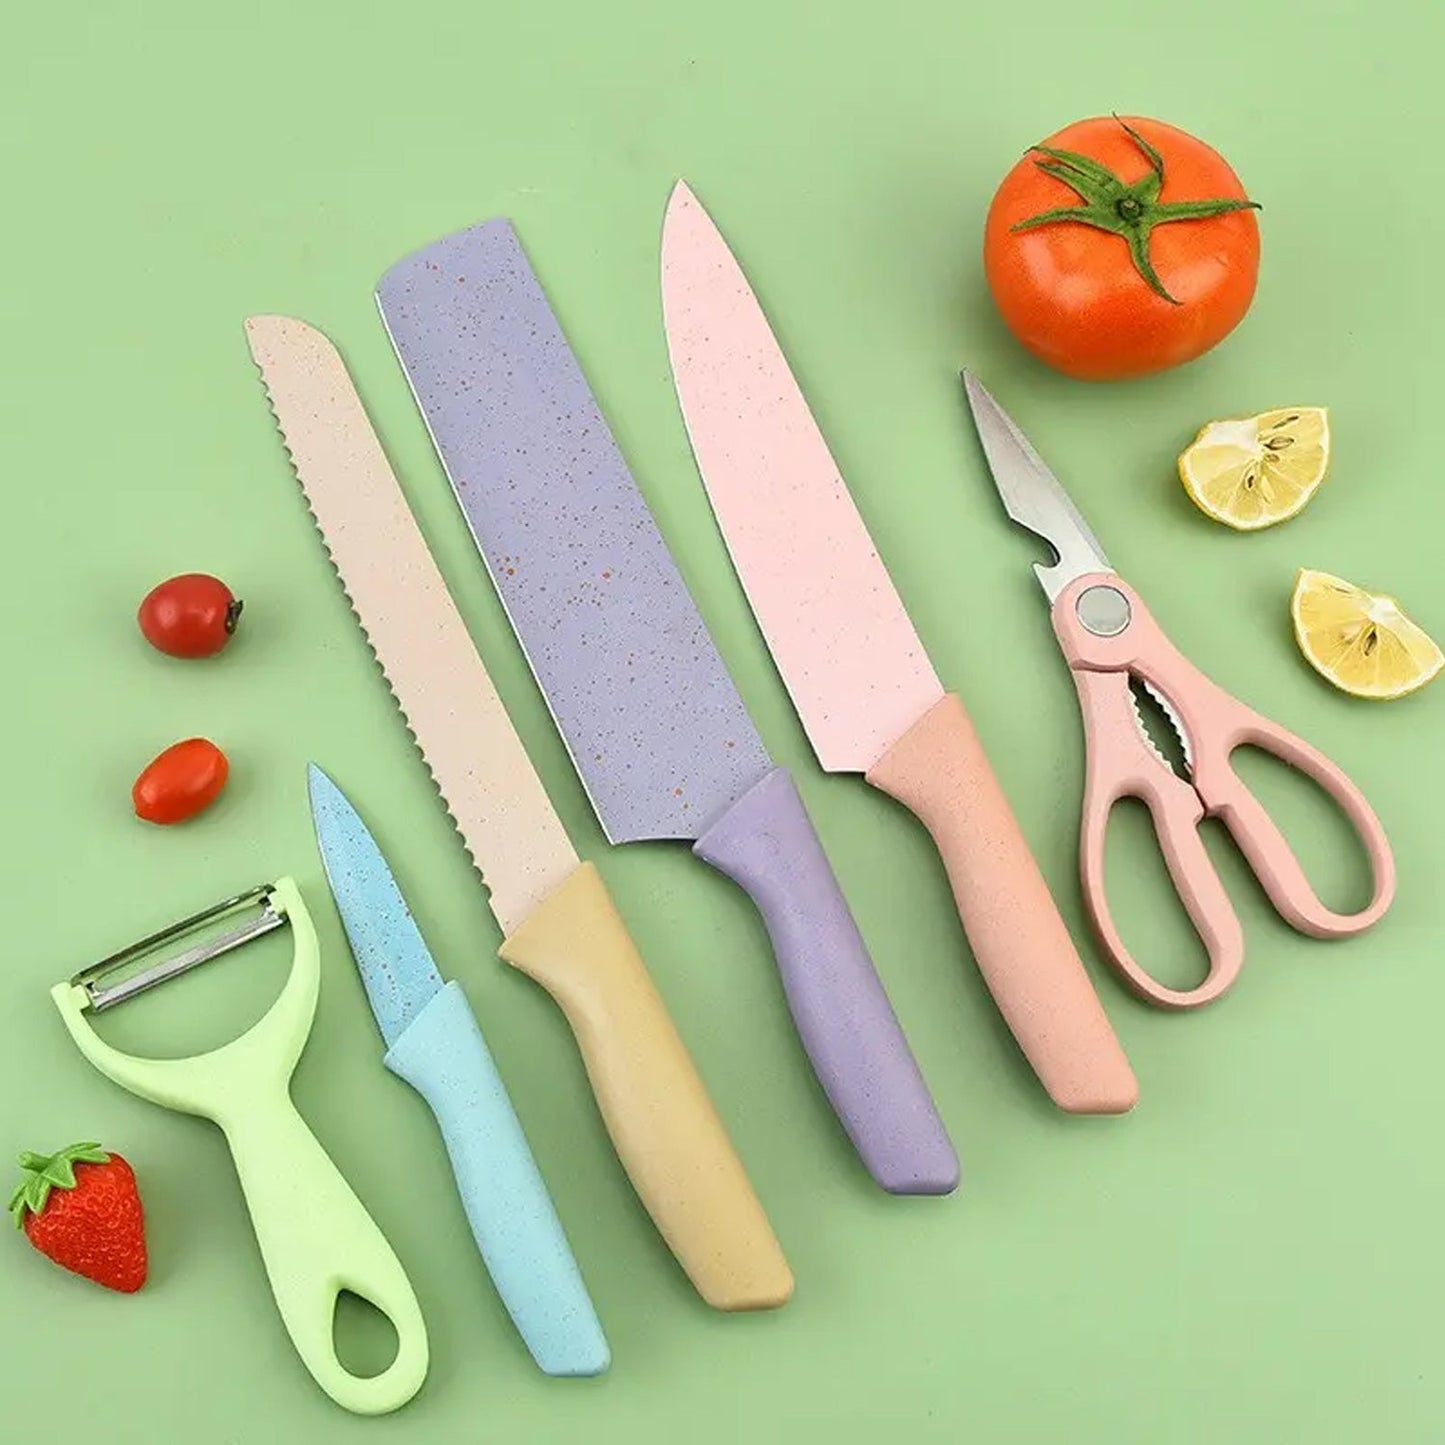 2948A Professional Colorful Kitchen Knives Set of 6 Pieces, Non-Stick Blades with High Carbon Stainless Steel, Sharp Kitchen Cutting Knives Set for Slicing, Paring and Cooking, Chef Kitchen Knives Set